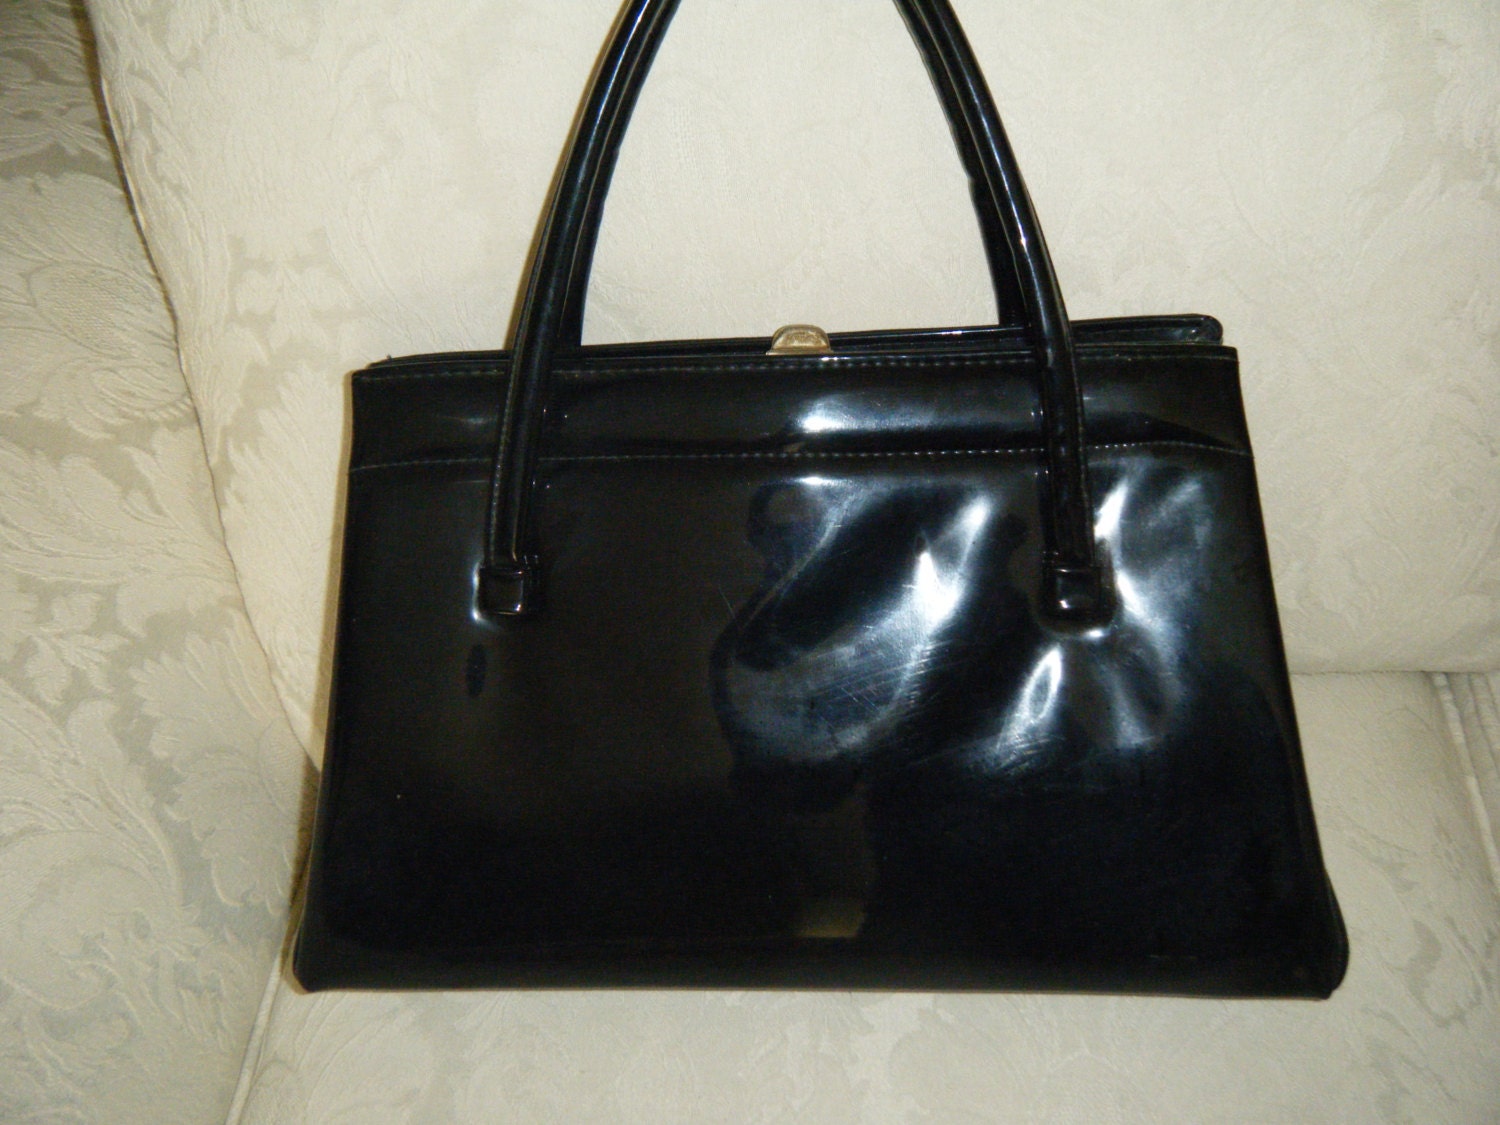 Ladies VINTAGE PURSE with clasp. Black patent leather style.